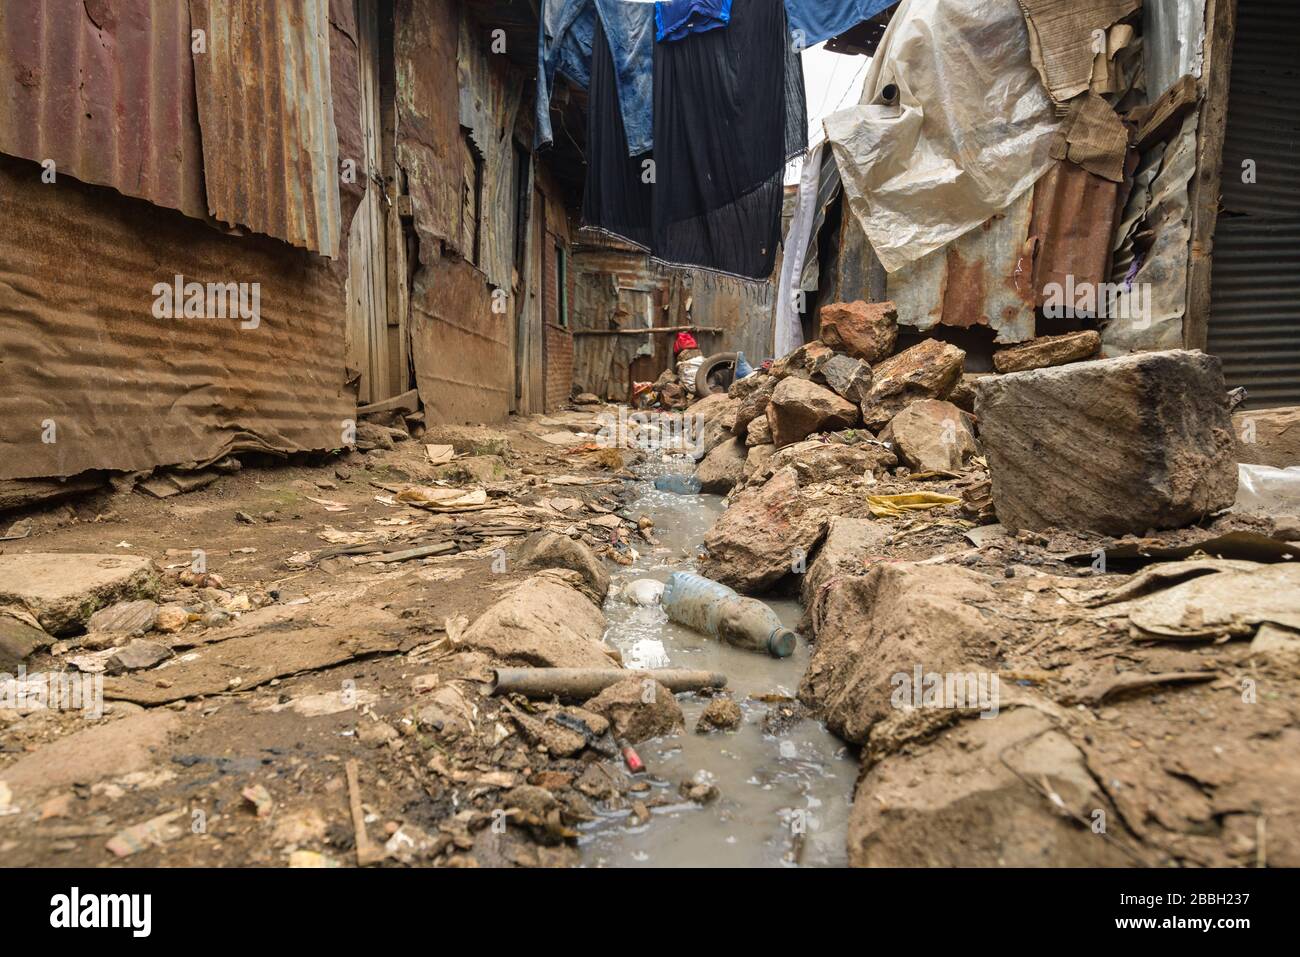 Open sewer running through small alley with metal slum shacks either side, Nairobi, Kenya Stock Photo